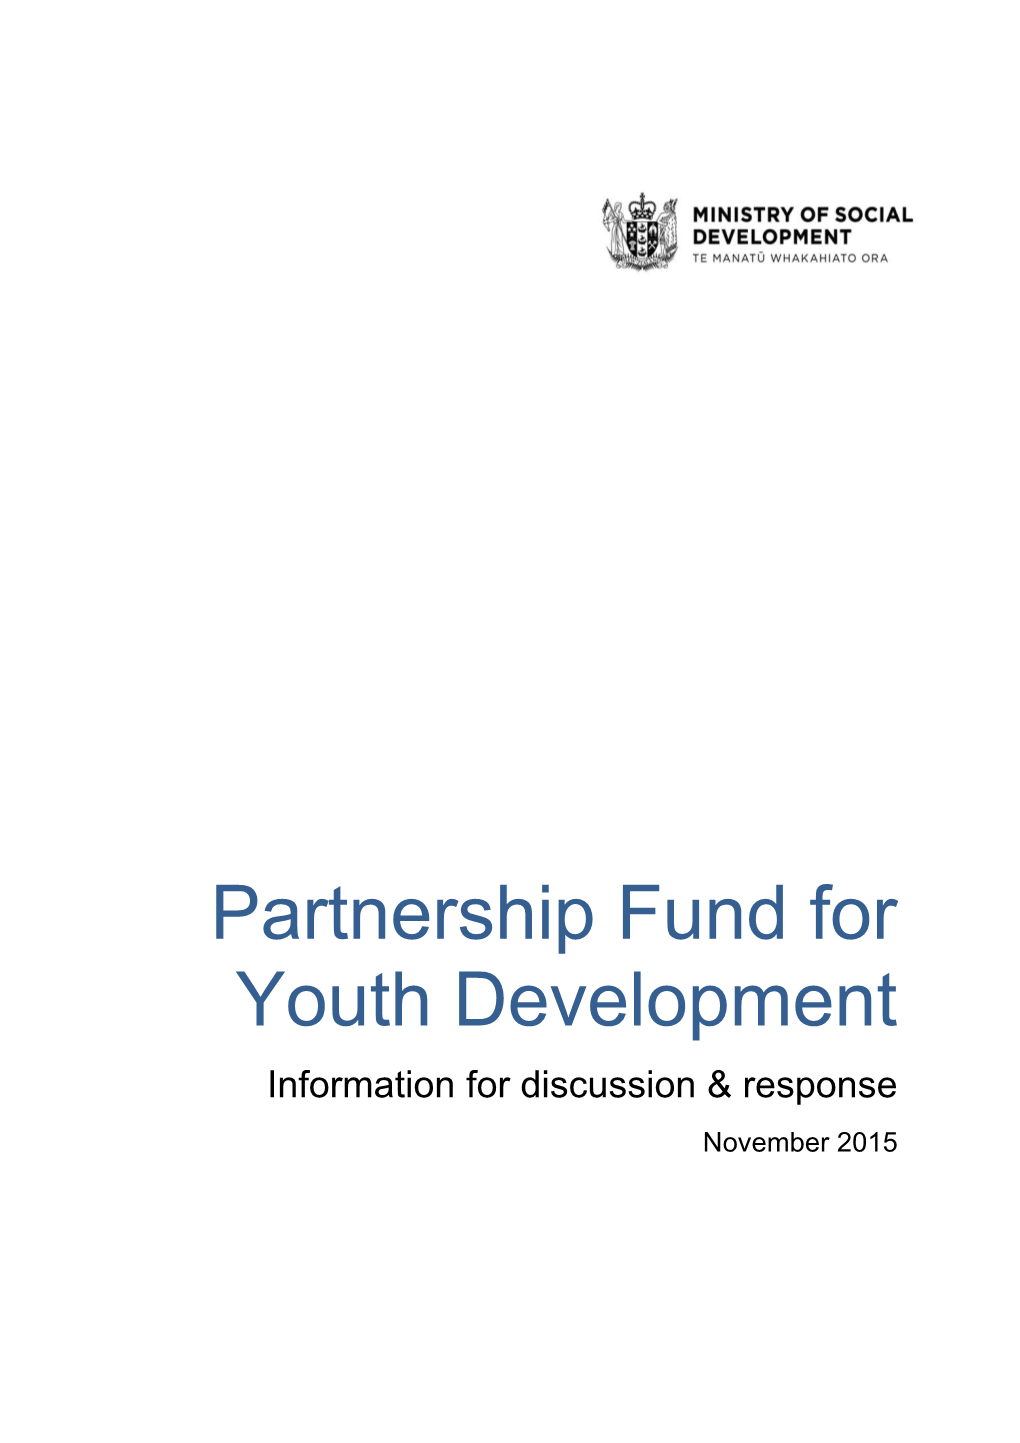 Partnership Fund for Youth Development